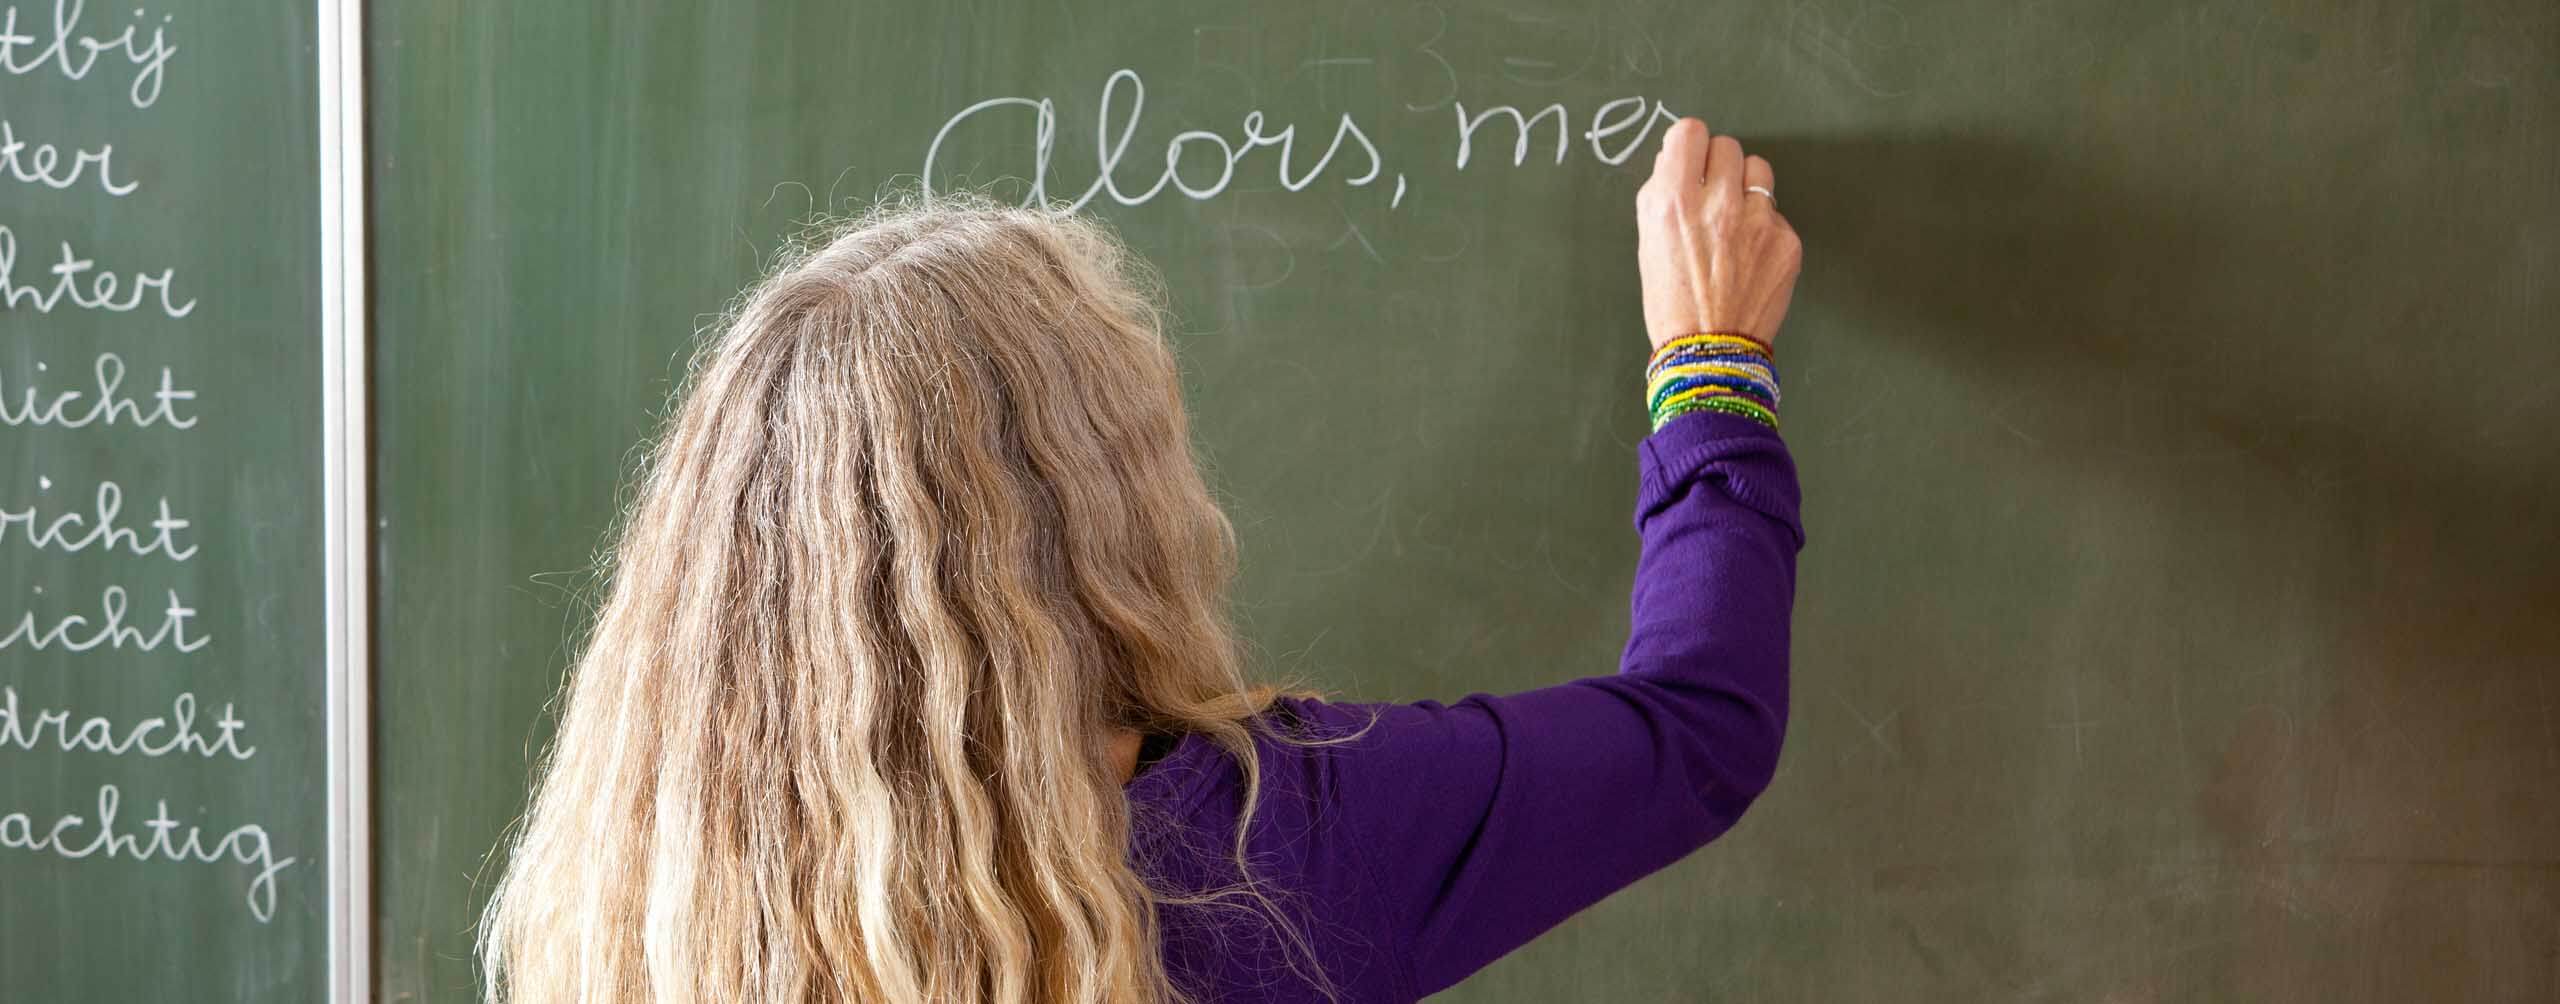 A photo of a person writing on a chalk board